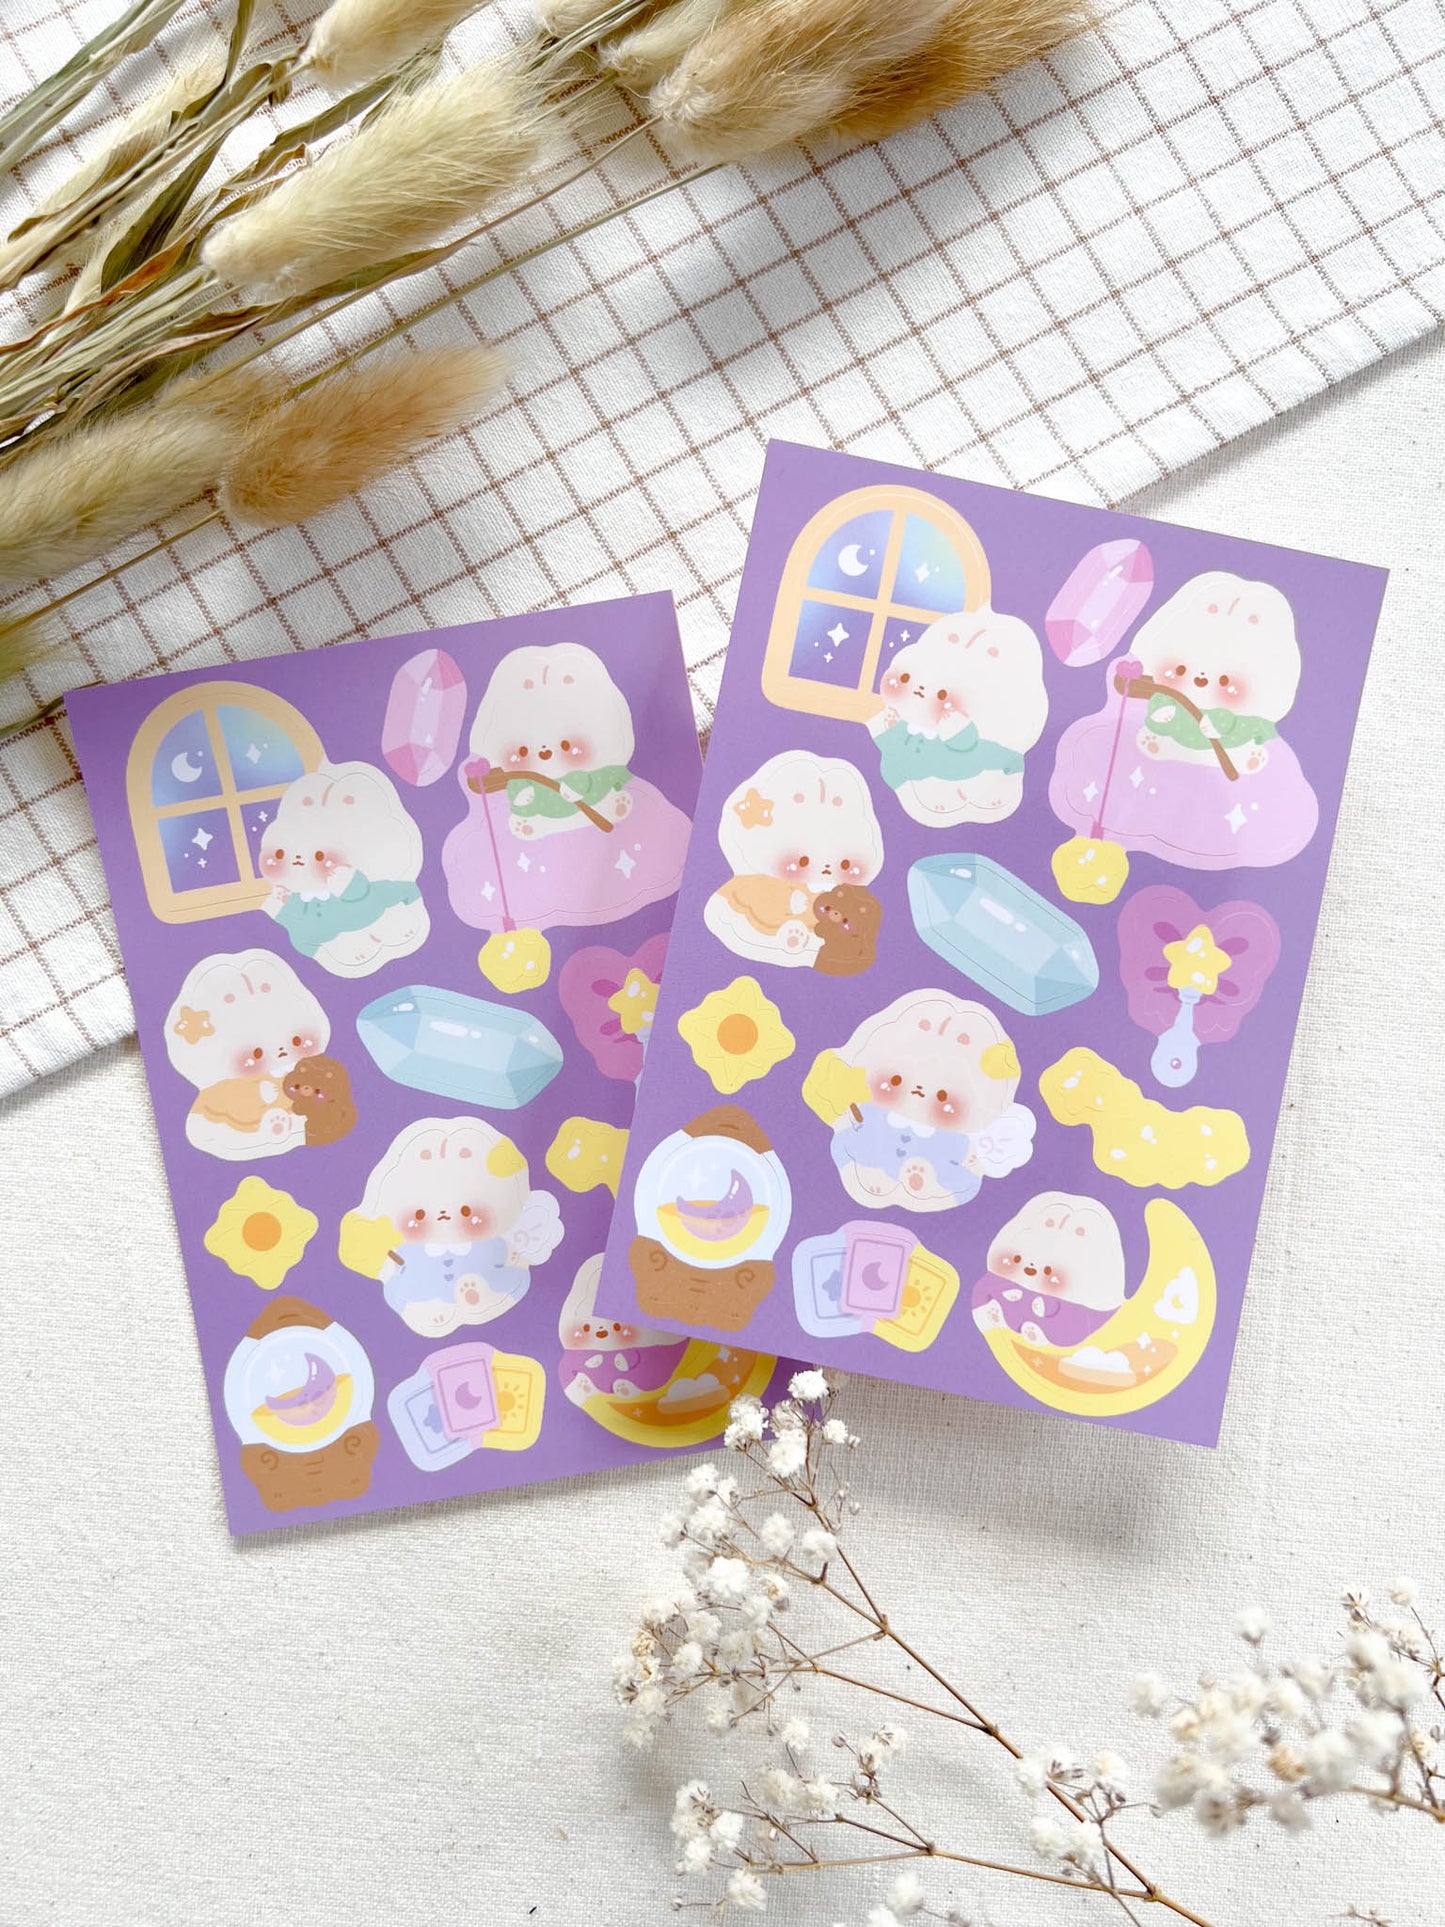 High-Quality Matte Vinyl Sticker Sheet - Celestial Bunny Bonbon with Magical Items - Water Resistant - A6 Size